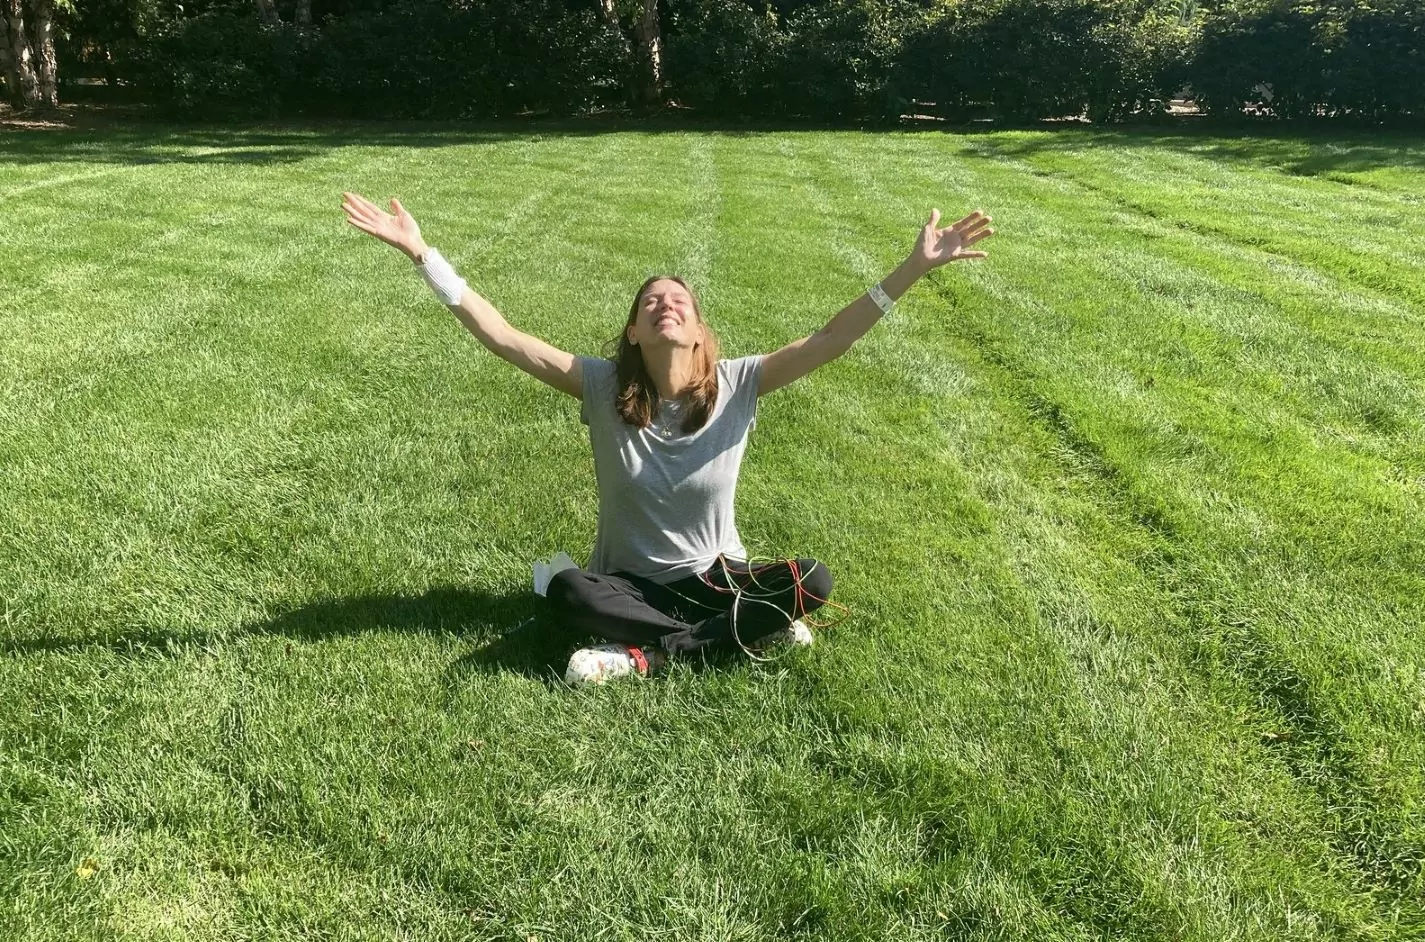 Sherry Johnson, outside on a large, green lawn with trees behind her, arms outstretched and face up taking in the sun